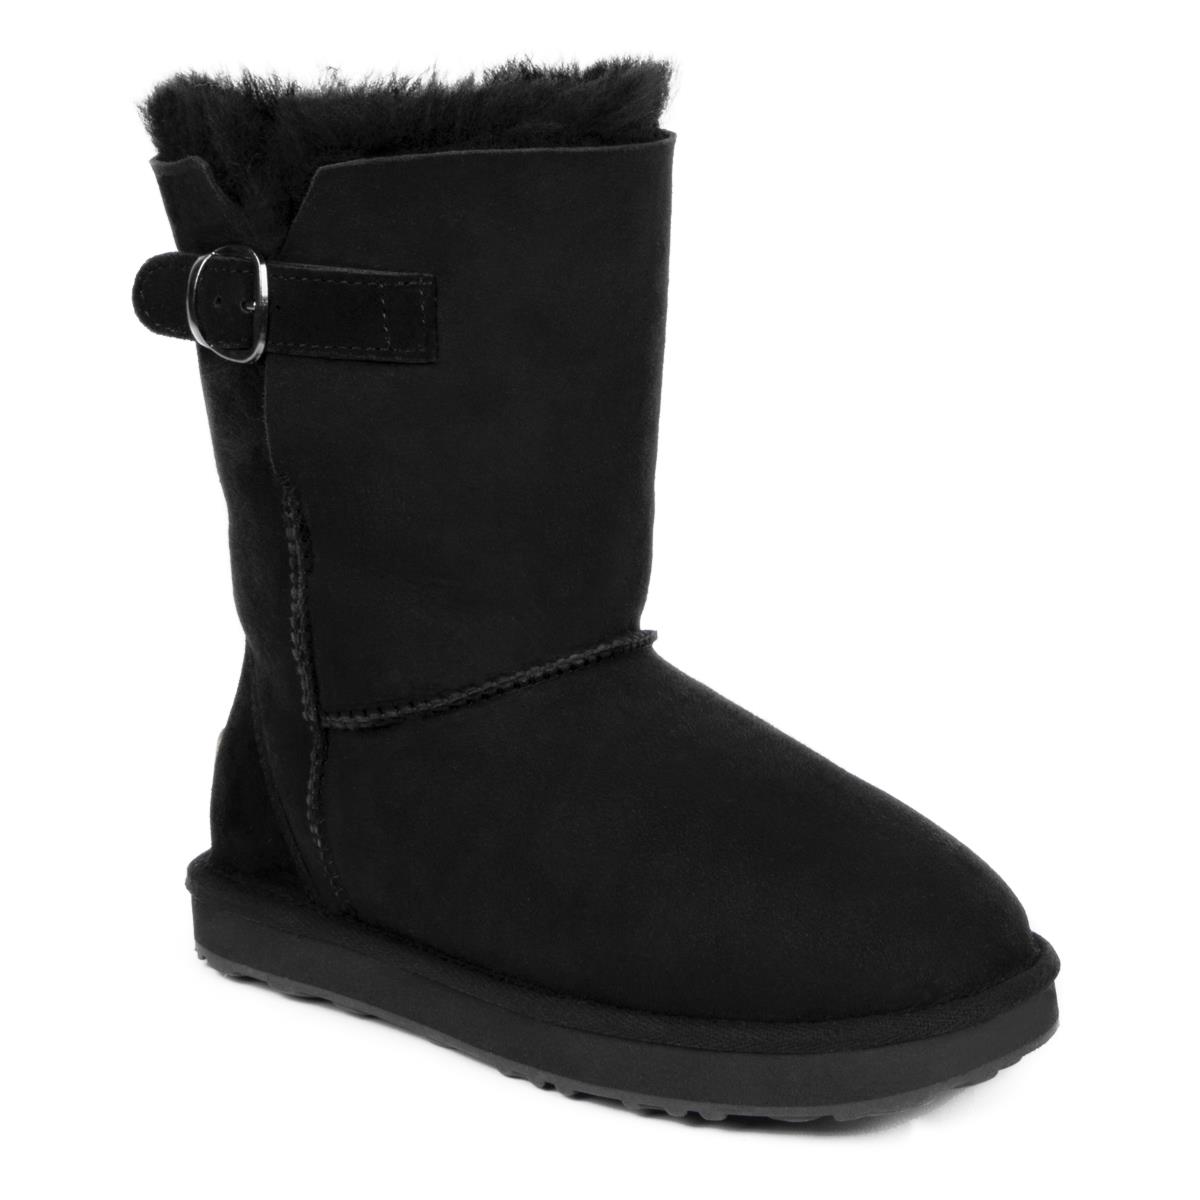 Ladies Surrey Sheepskin Boots | Just Sheepskin Slippers and Boots